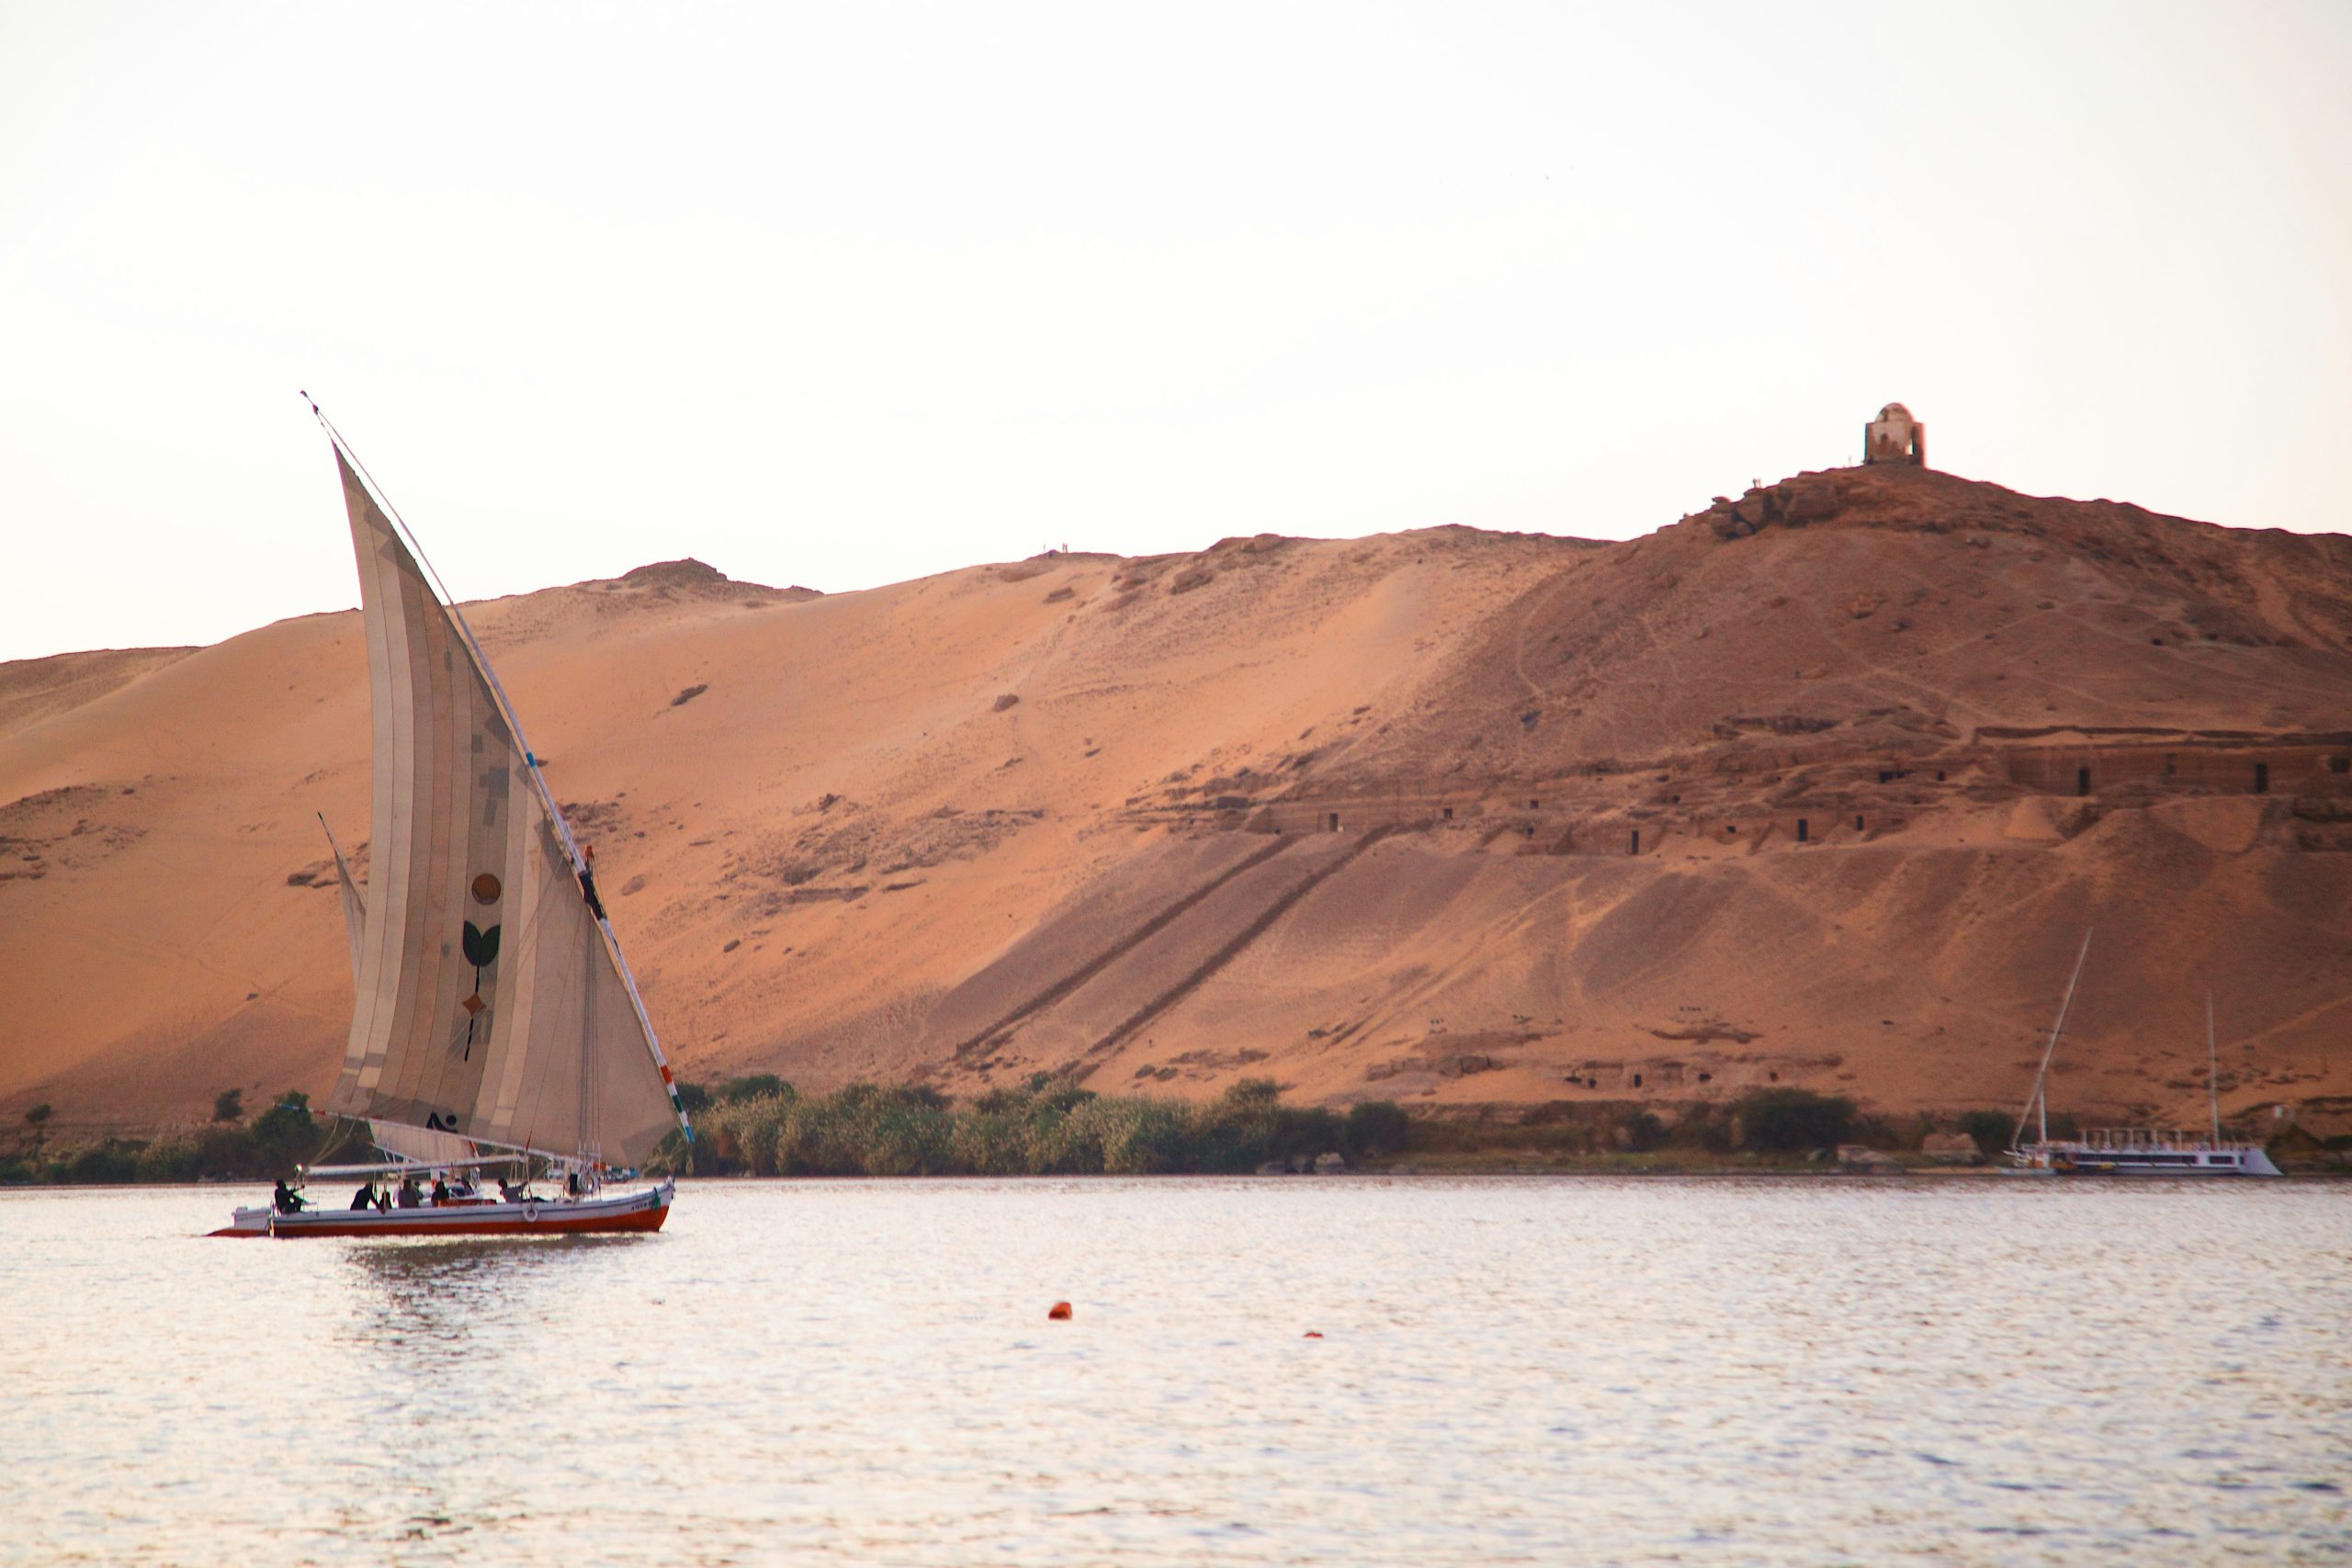 explore the beauty of egypt with a mesmerizing nile cruise. discover ancient wonders and immerse yourself in the rich history of this iconic river.